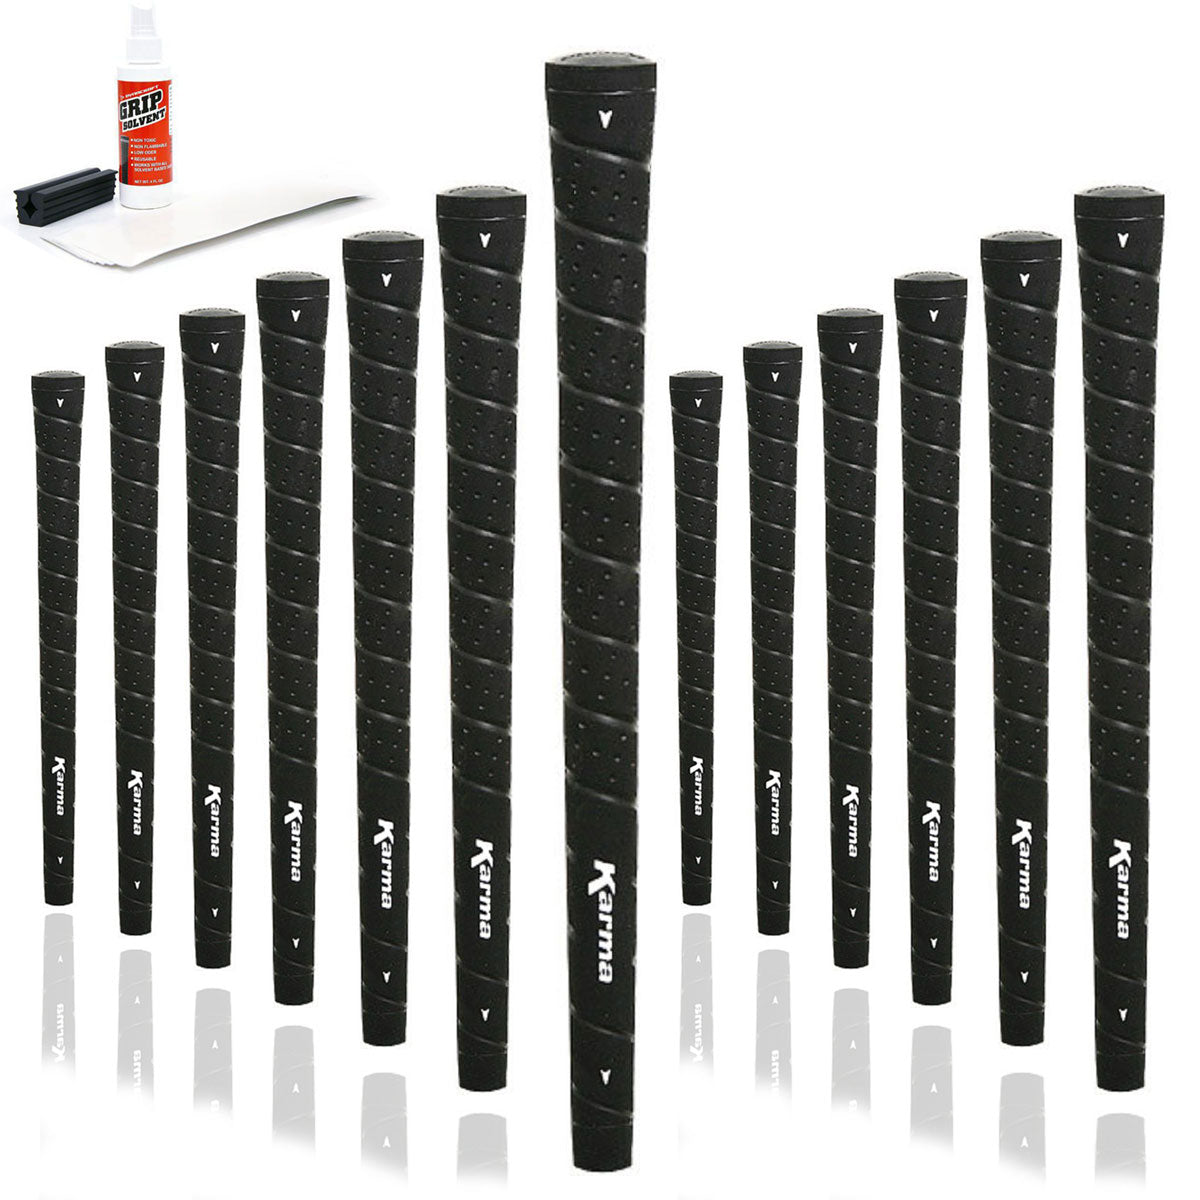 13 Karma Wrap golf grips, golf grip tape strips, bottle of grip solvent and rubber shaft clamp